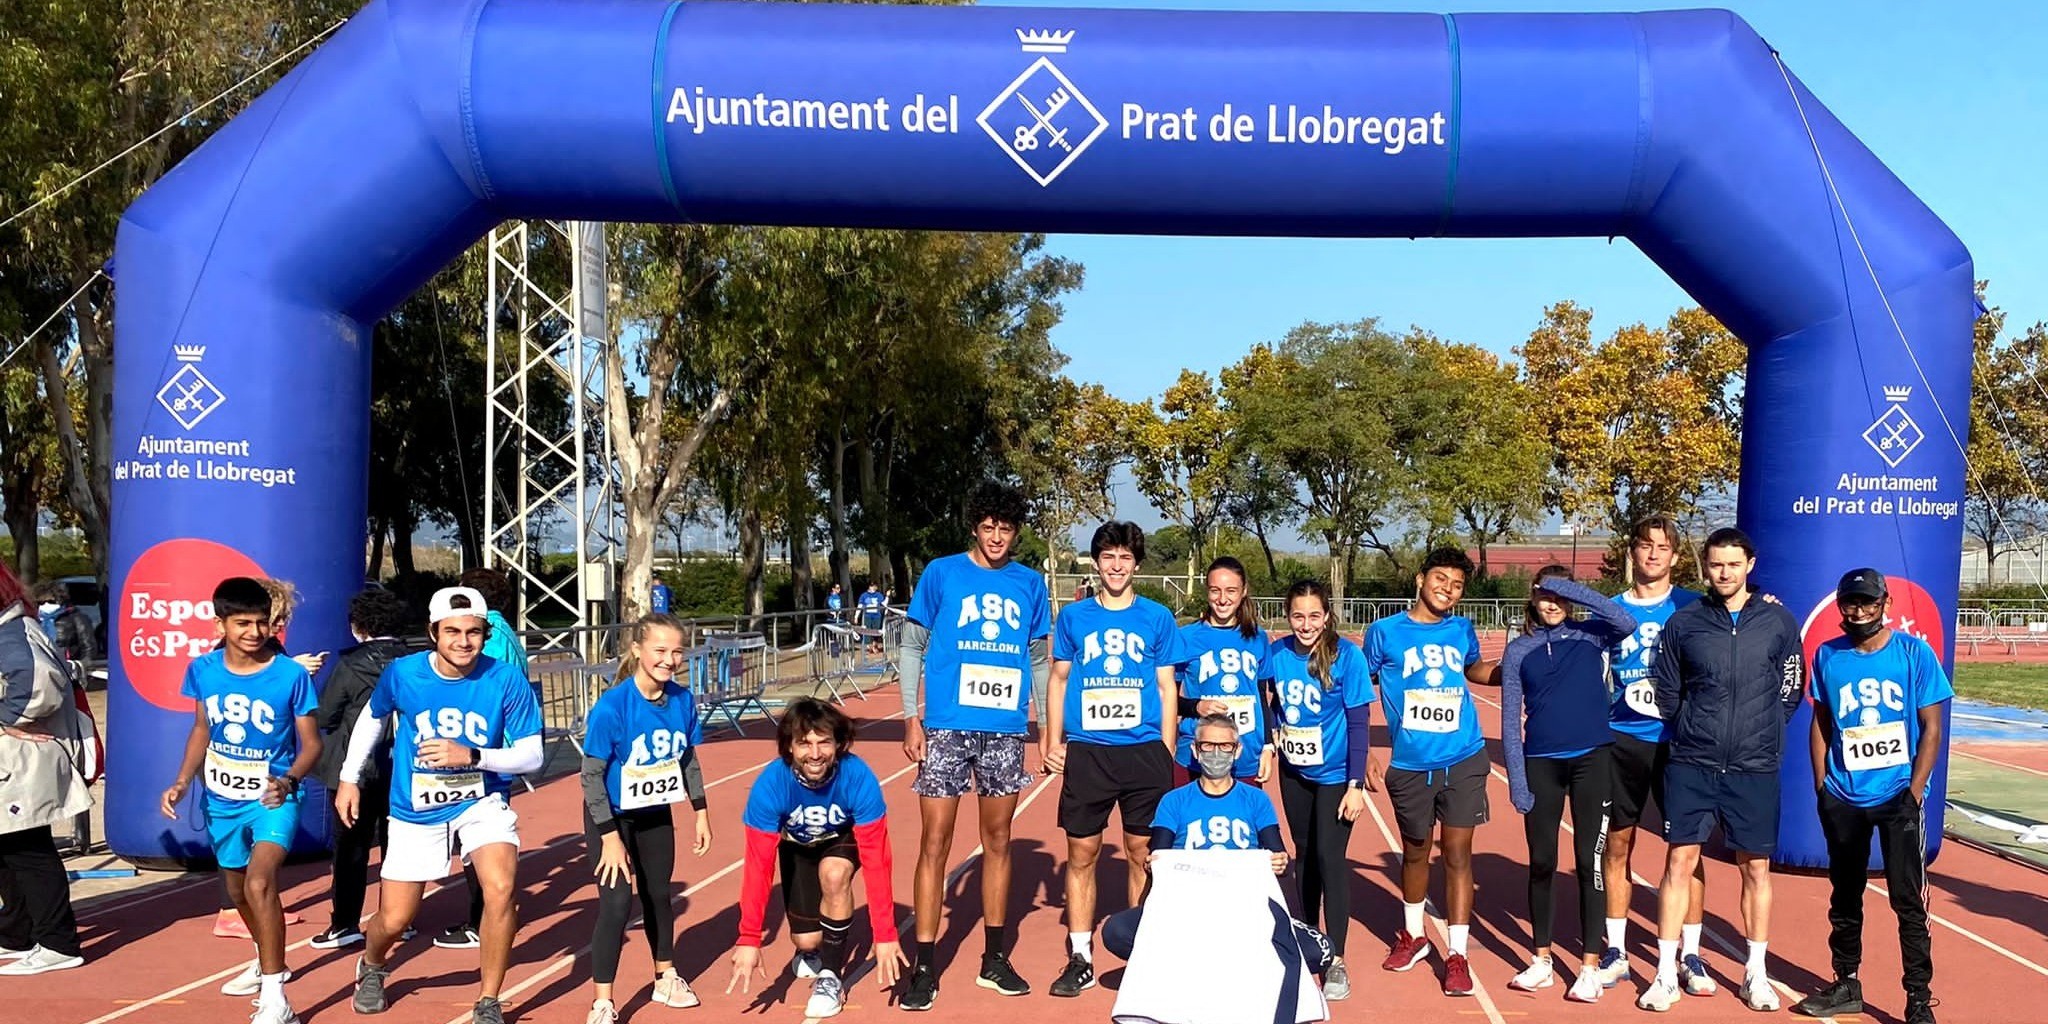 Our staff and students, in the III edition of the Charity Race to raise funds for childhood cancer research (Sant Joan de Deu Hospital).